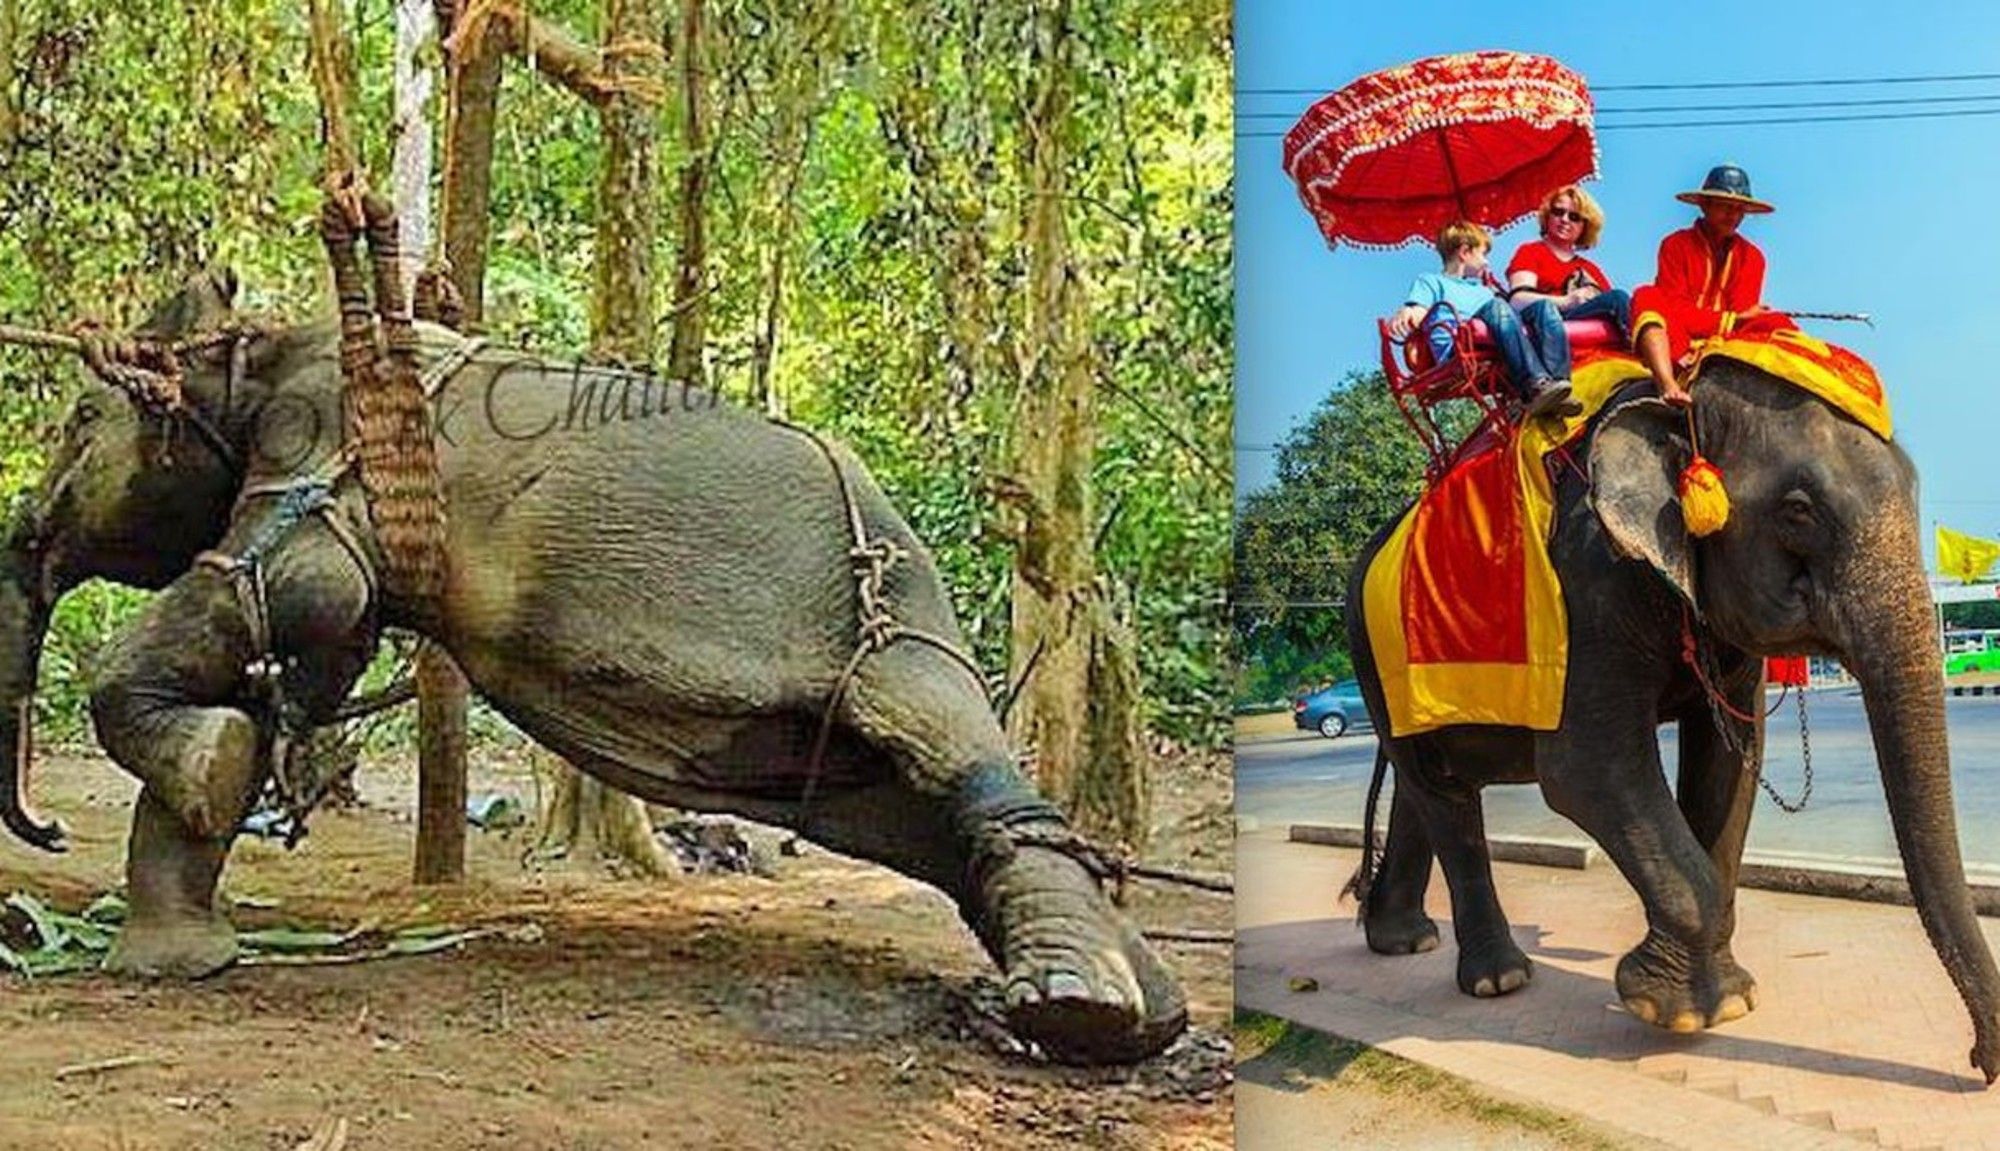 This Is What Happens Before The Elephant Ride | Elephant ride ...